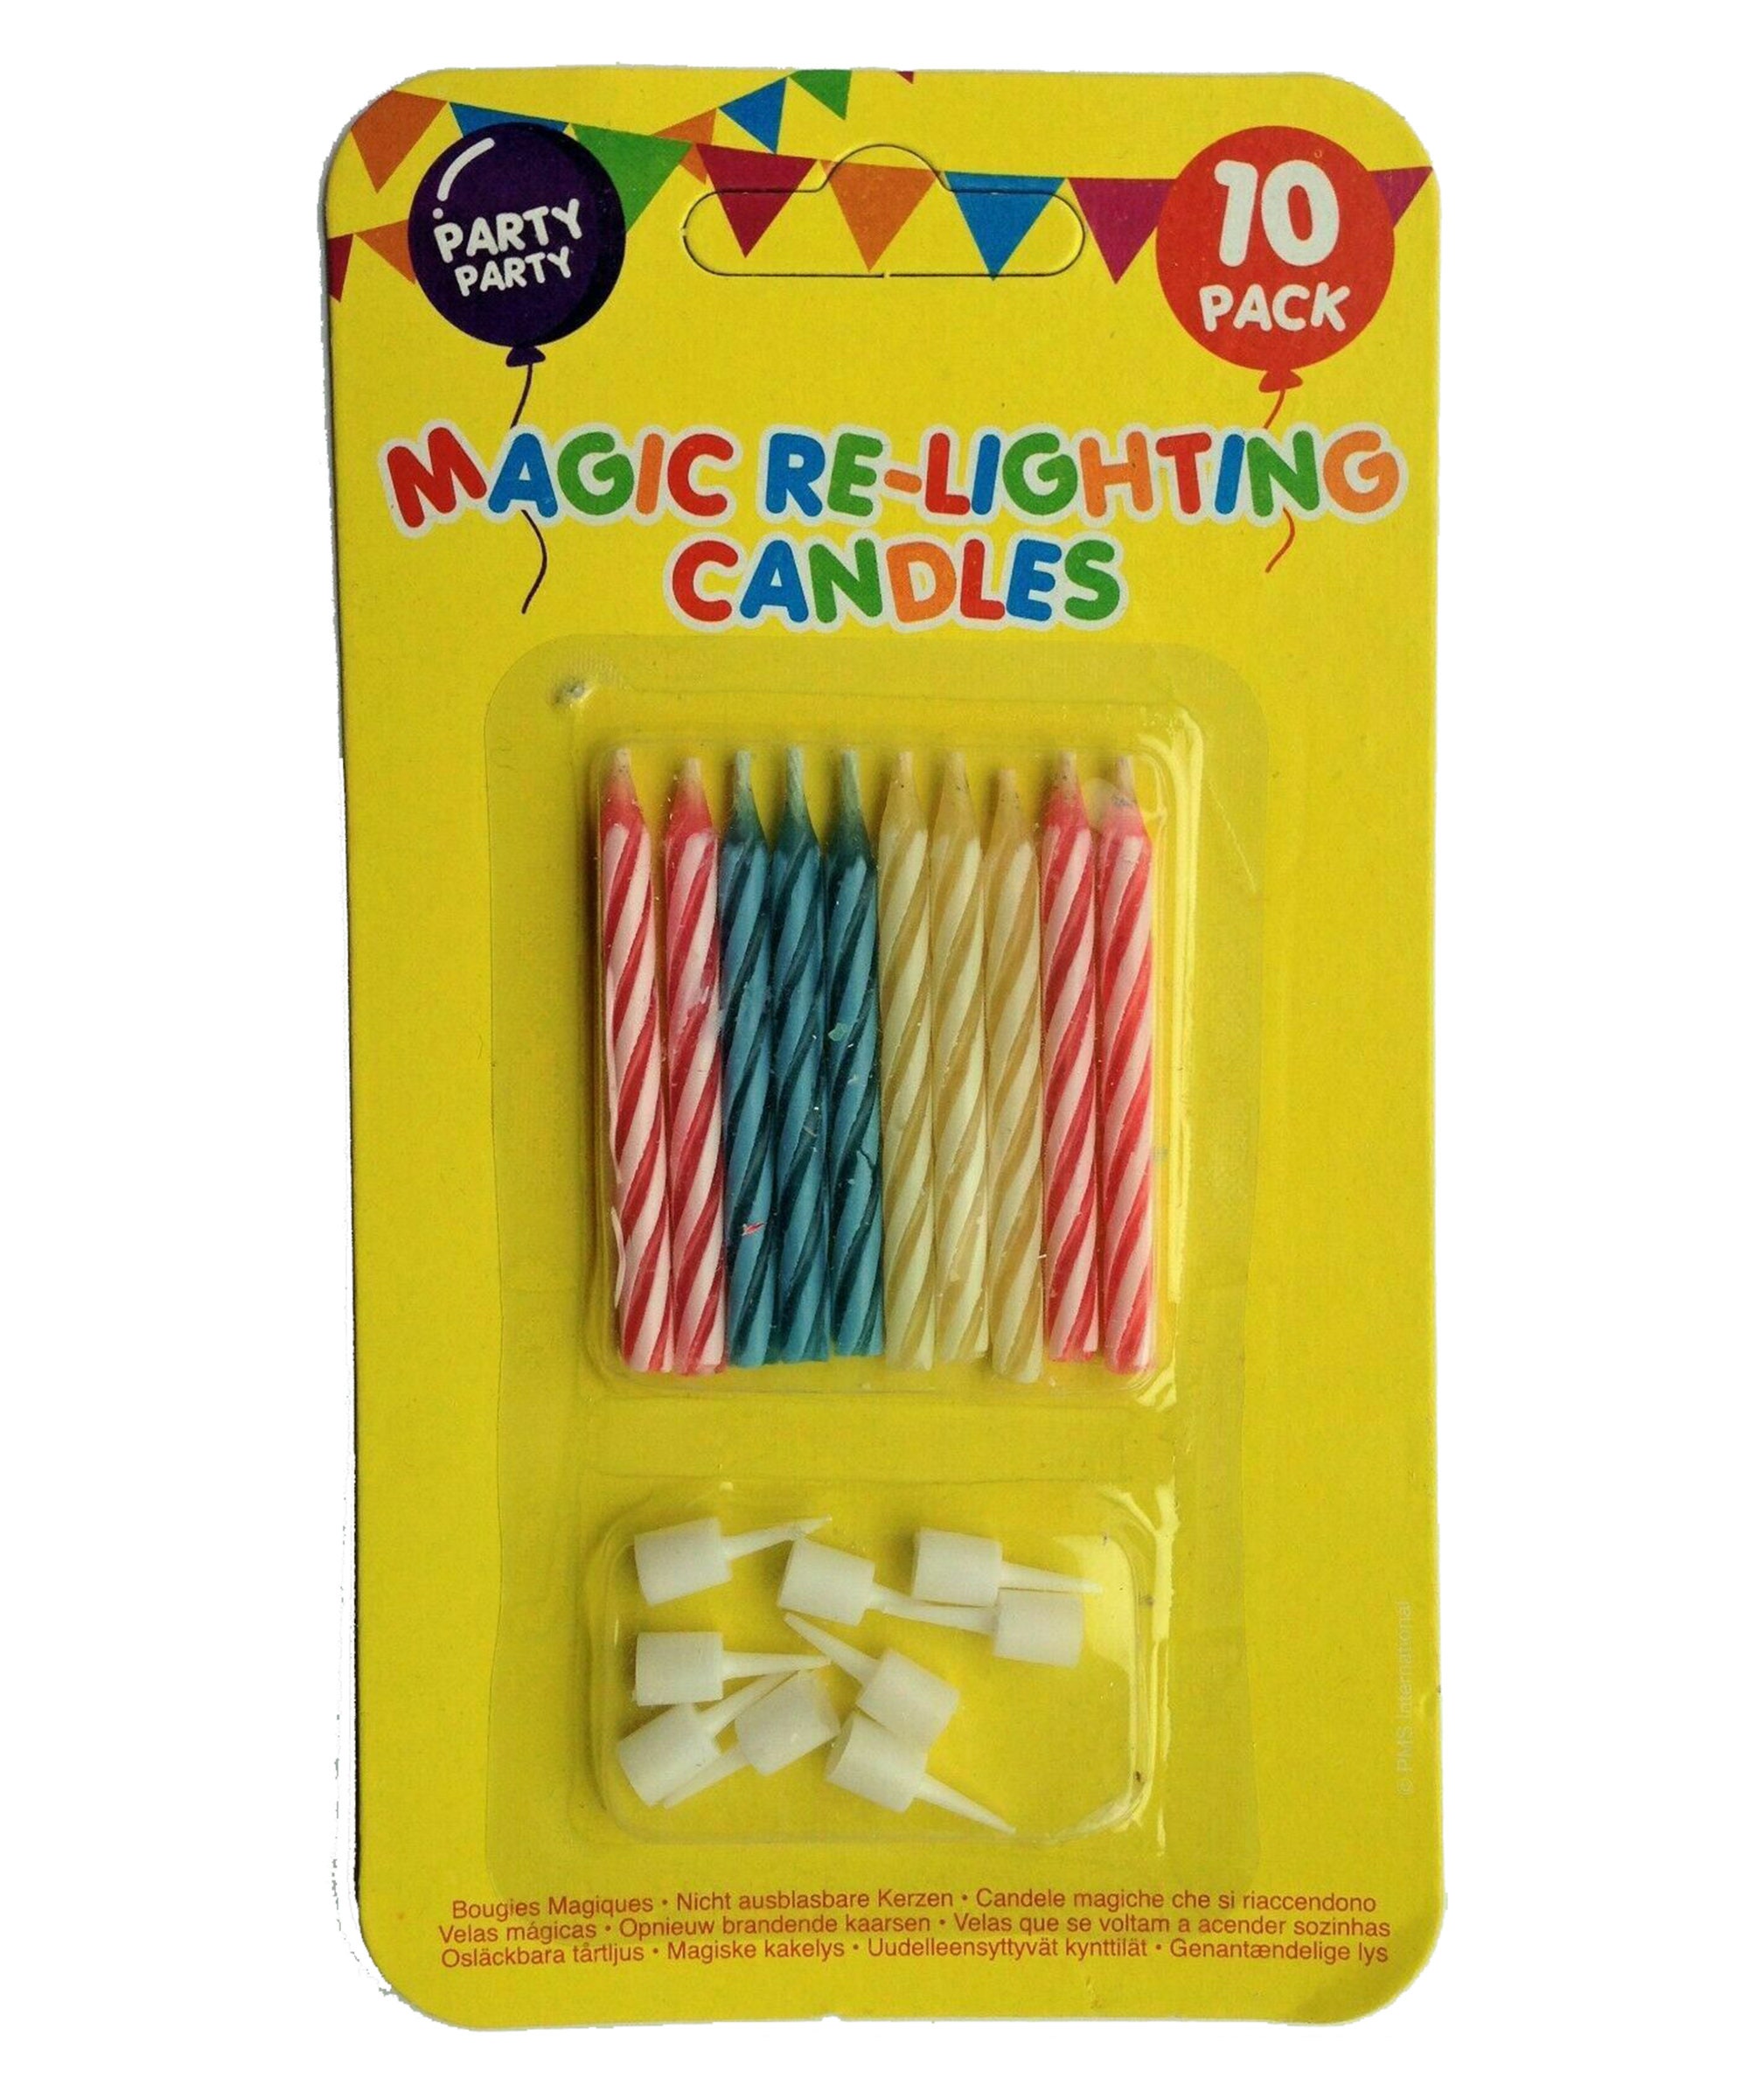 Magic Relighting Candles. Birthday Candle Set With White Holders 10 Stripe  Candles Pink Blue Yellow Joke Novelty Candles Hard to Blow Out -  Hong  Kong